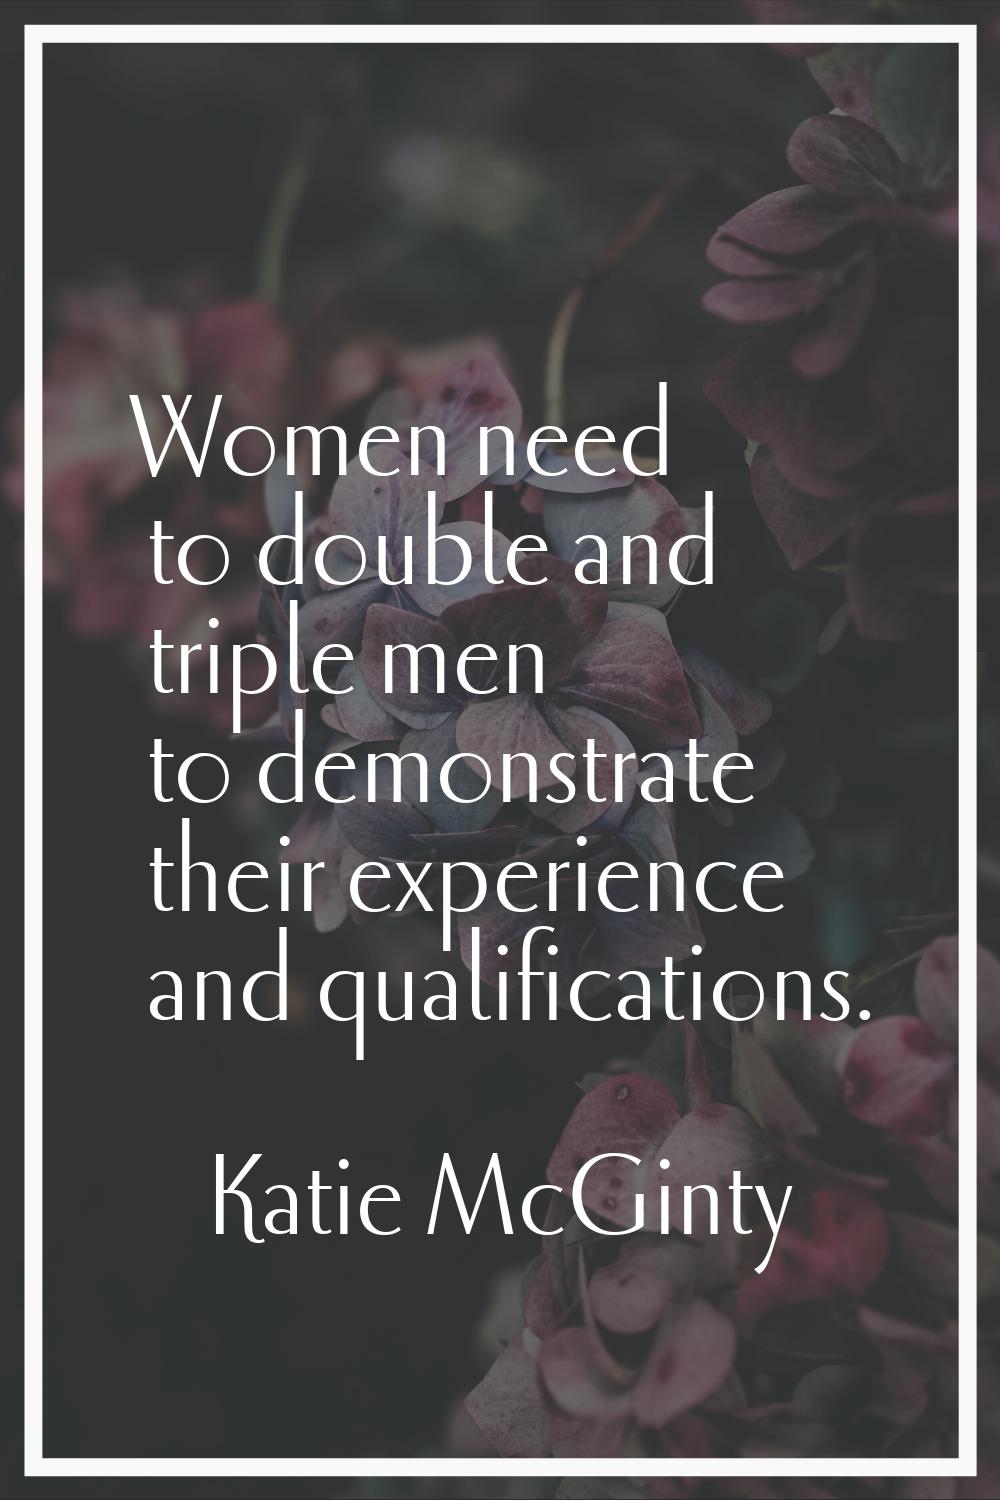 Women need to double and triple men to demonstrate their experience and qualifications.